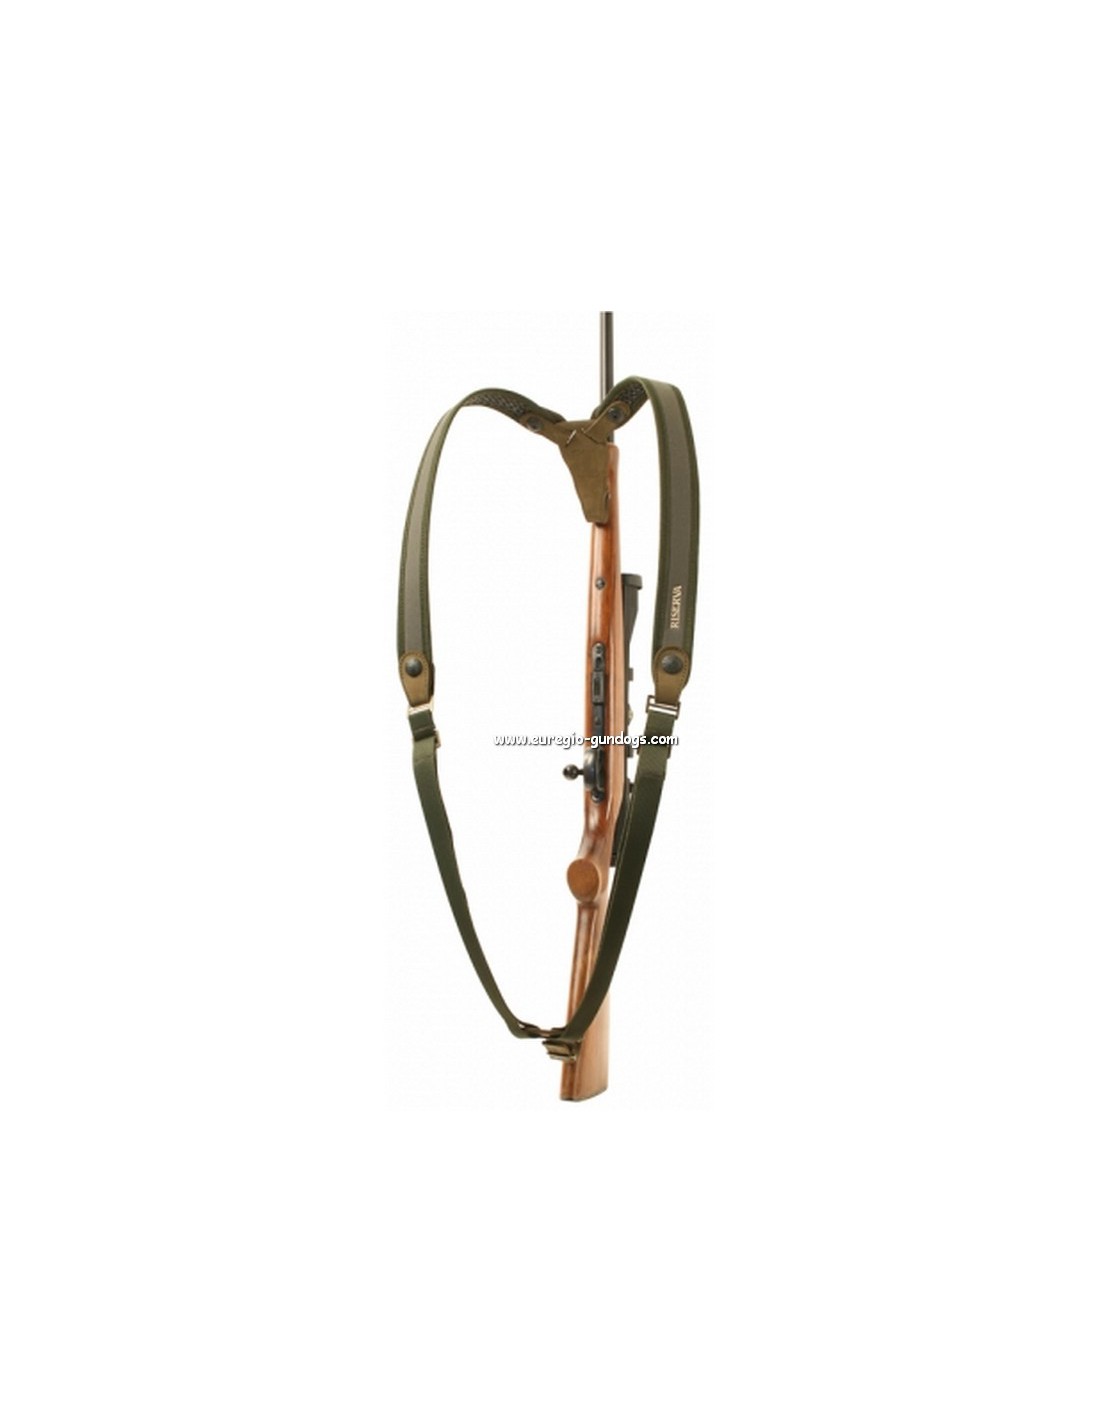 backpack rifle sling from riserva